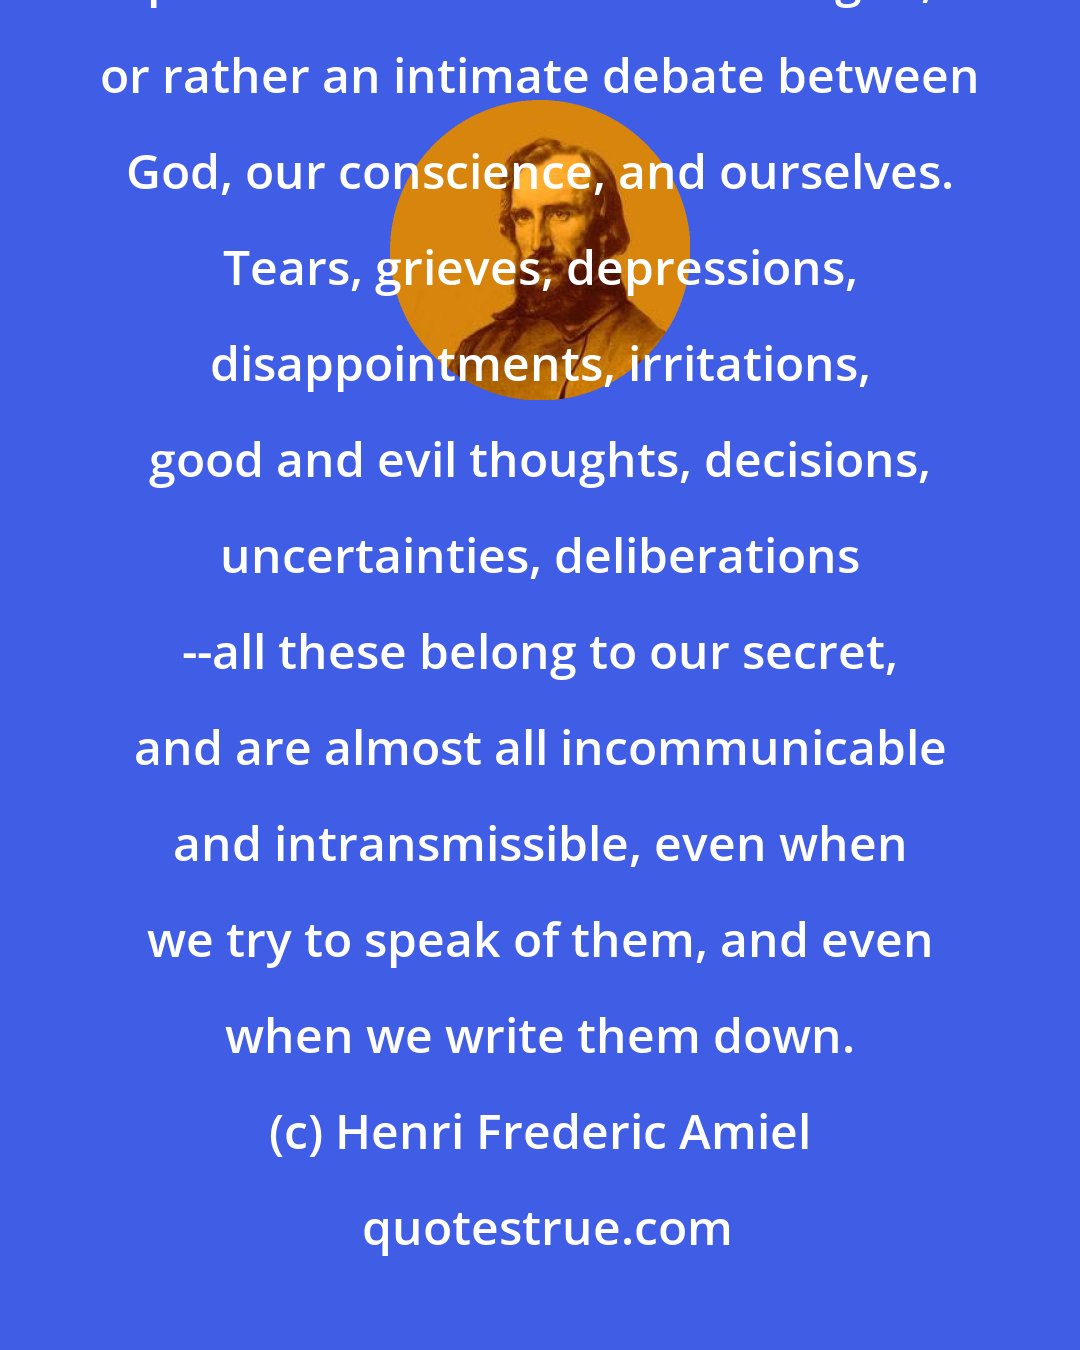 Henri Frederic Amiel: Our true history is scarcely ever deciphered by others. The chief part of the drama is a monologue, or rather an intimate debate between God, our conscience, and ourselves. Tears, grieves, depressions, disappointments, irritations, good and evil thoughts, decisions, uncertainties, deliberations --all these belong to our secret, and are almost all incommunicable and intransmissible, even when we try to speak of them, and even when we write them down.